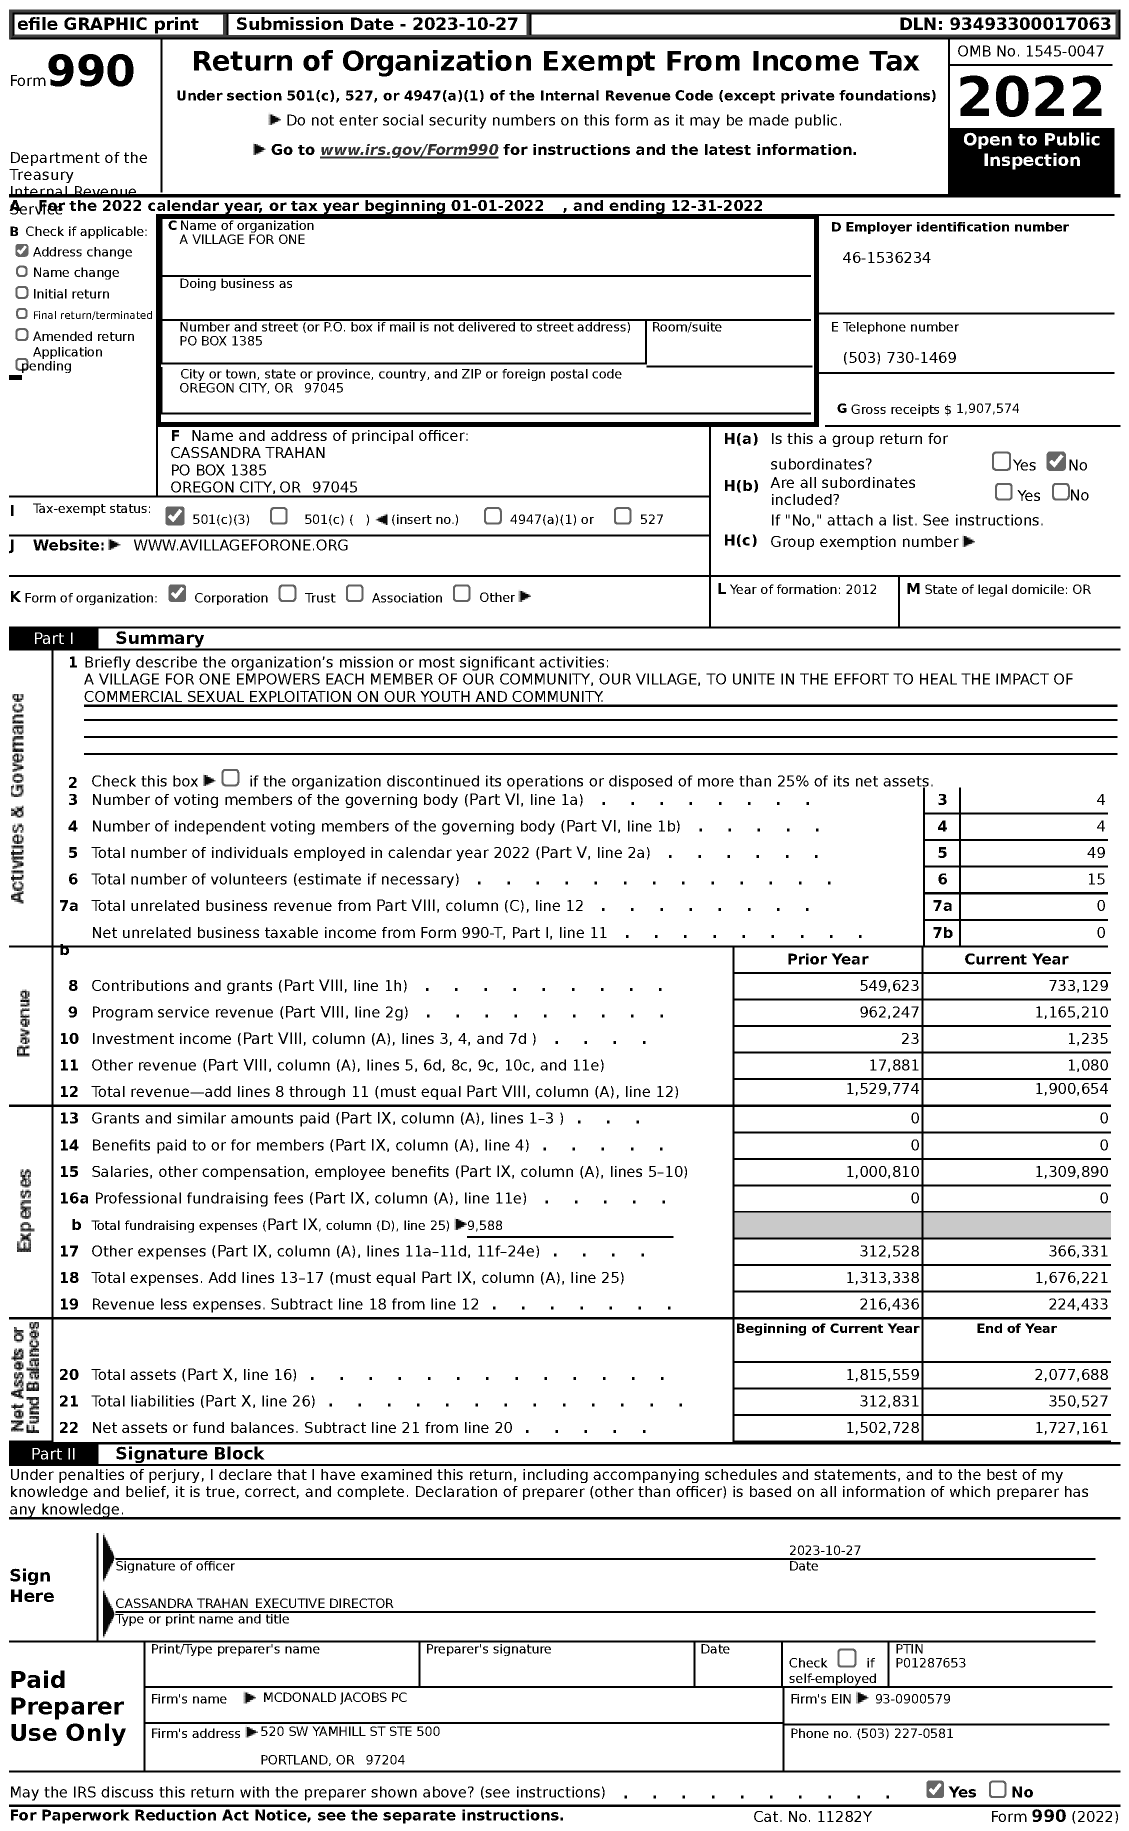 Image of first page of 2022 Form 990 for A Village for One